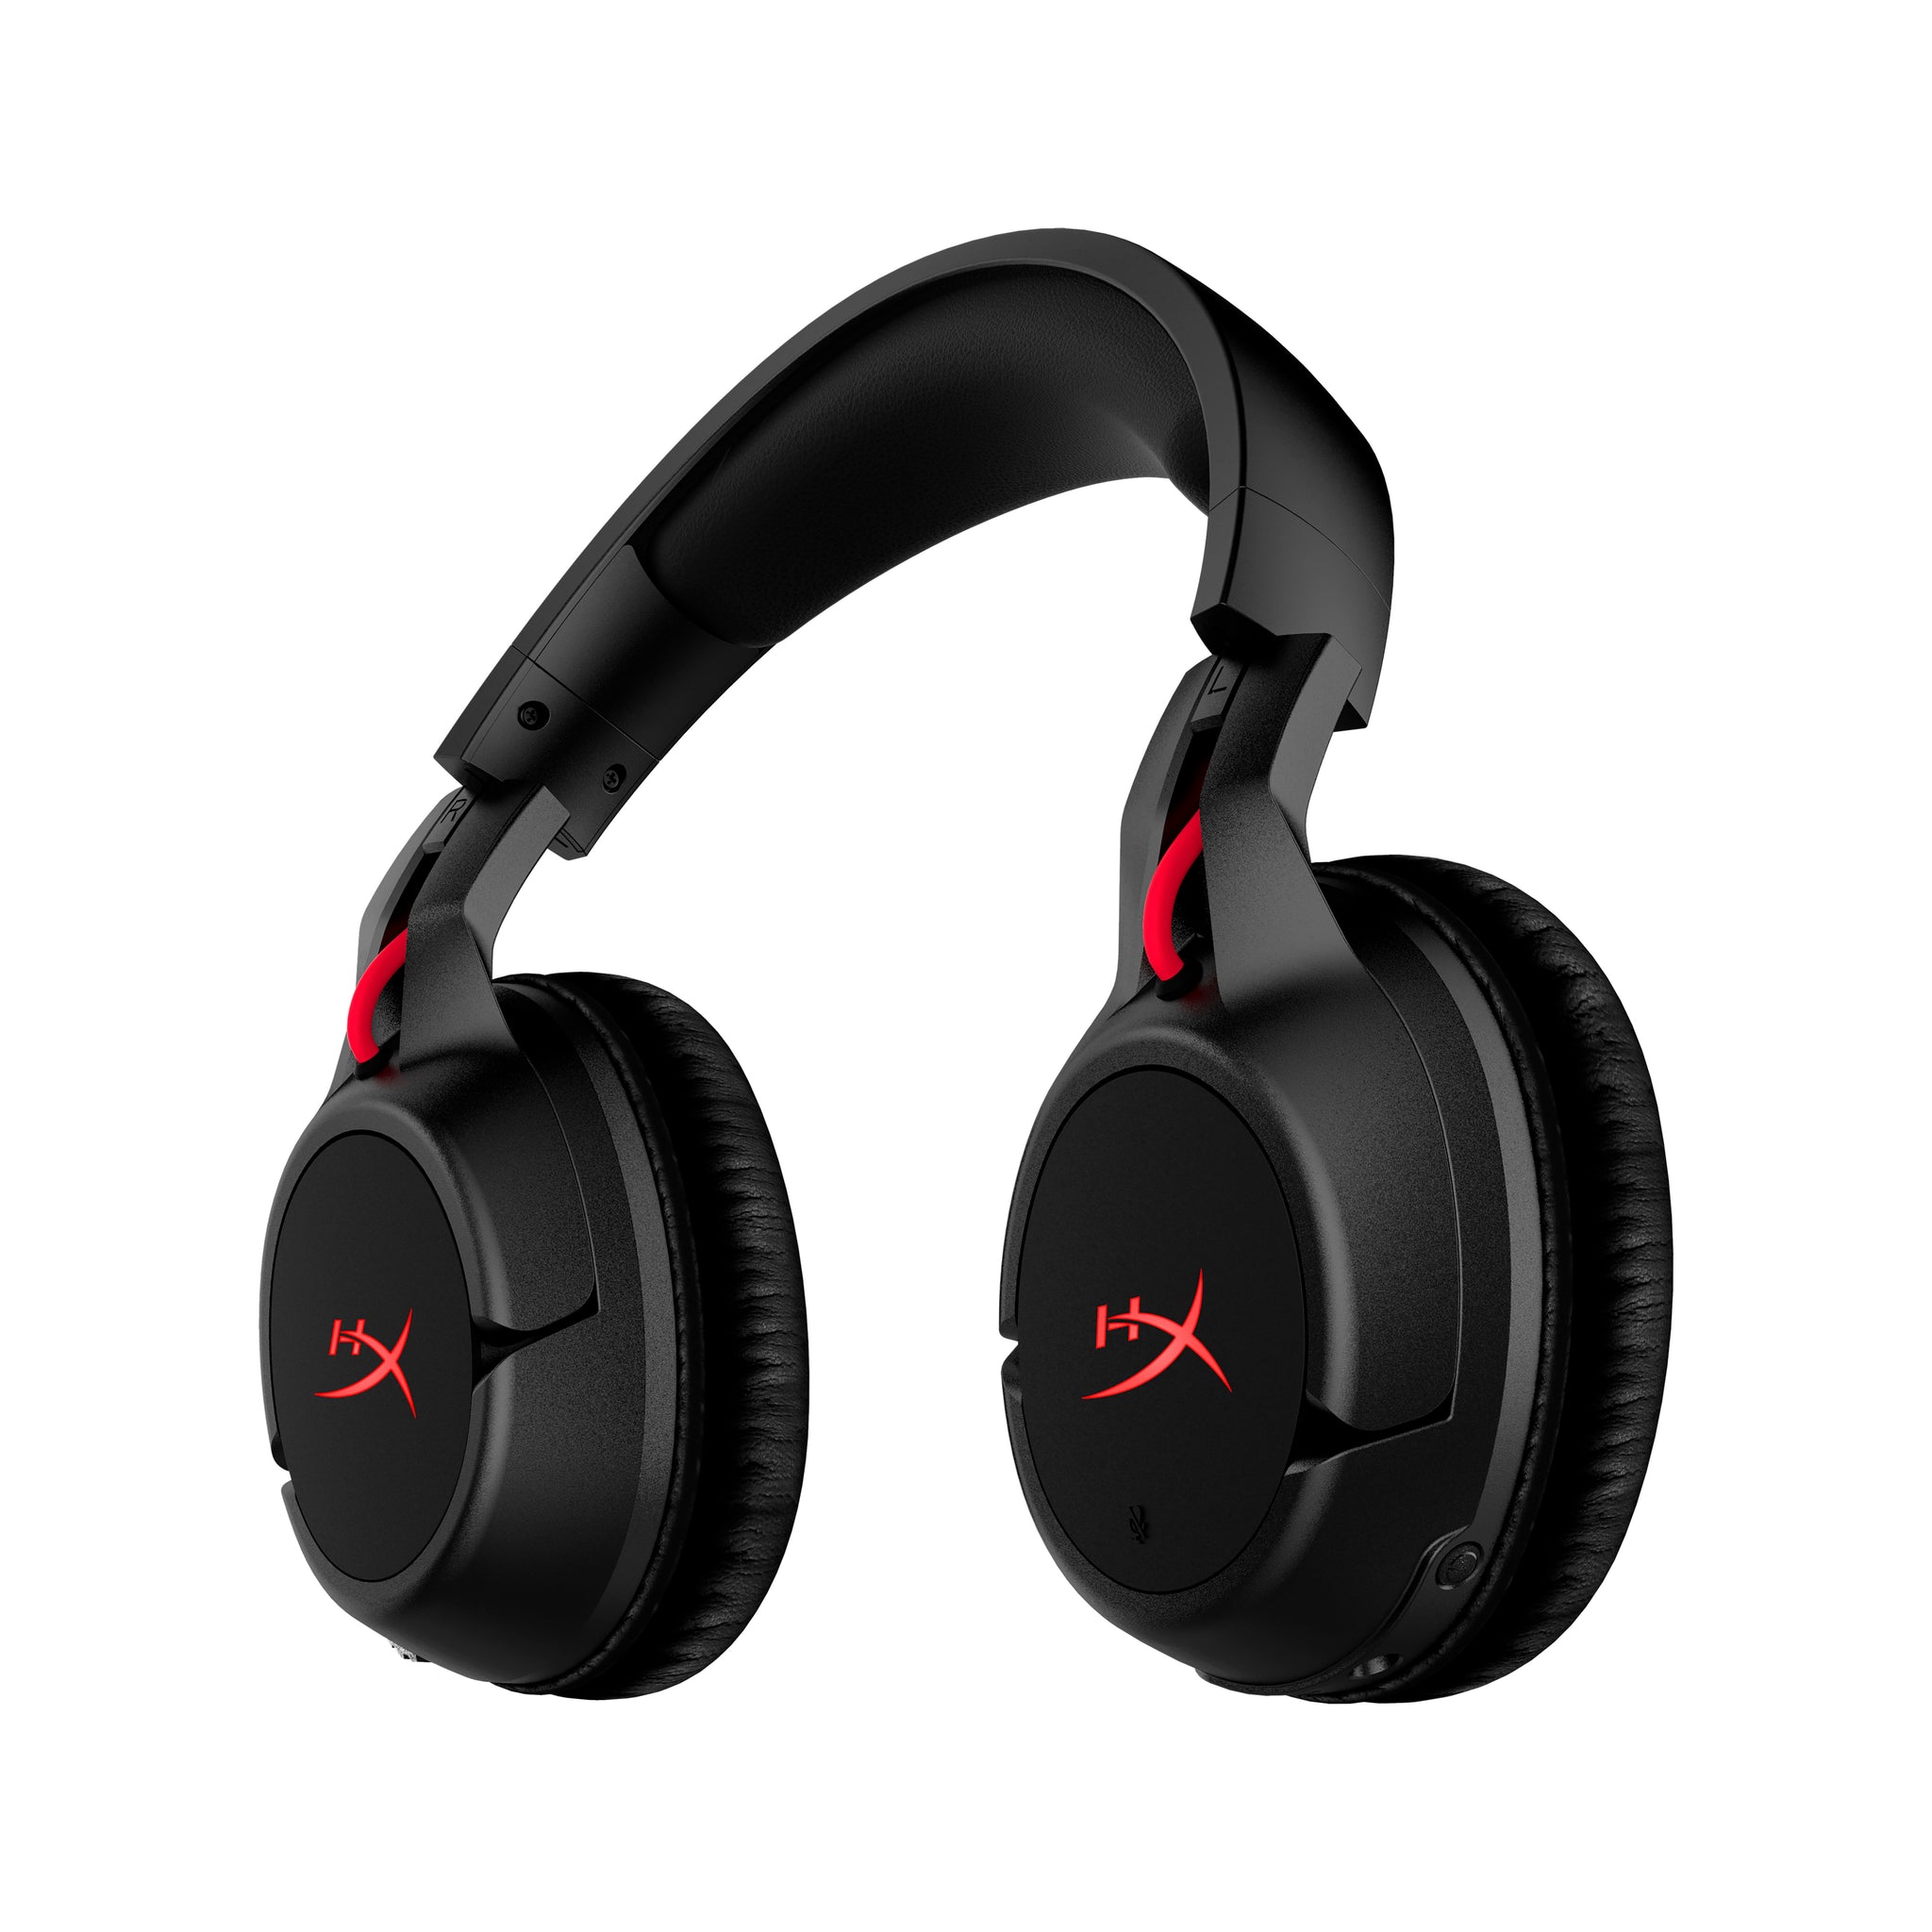 HyperX Cloud Flight Product Image Showing the Earpads Rotated